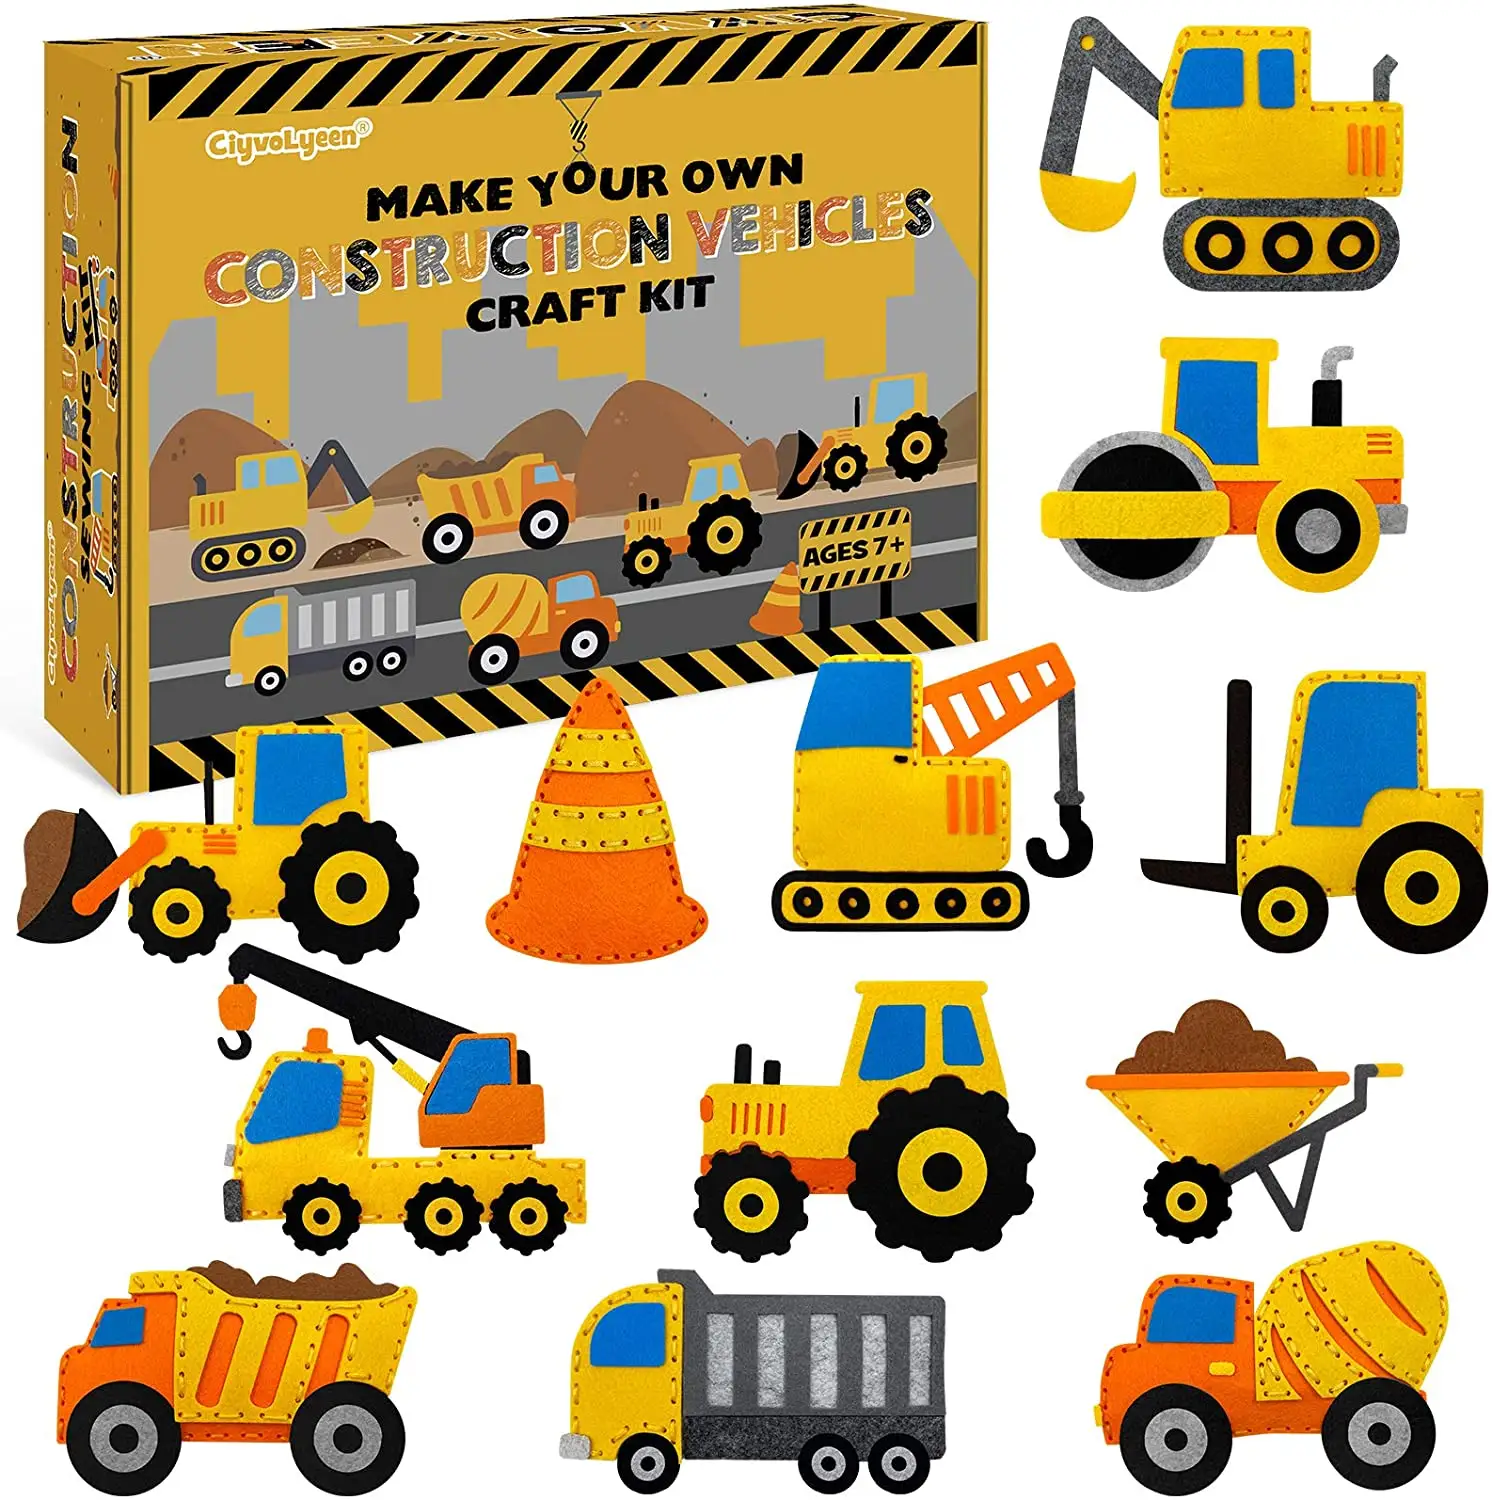 other toys children Christmas handmade pre-cut truck excavator wood shapes felt sewing kit and kids DIY arts and crafts